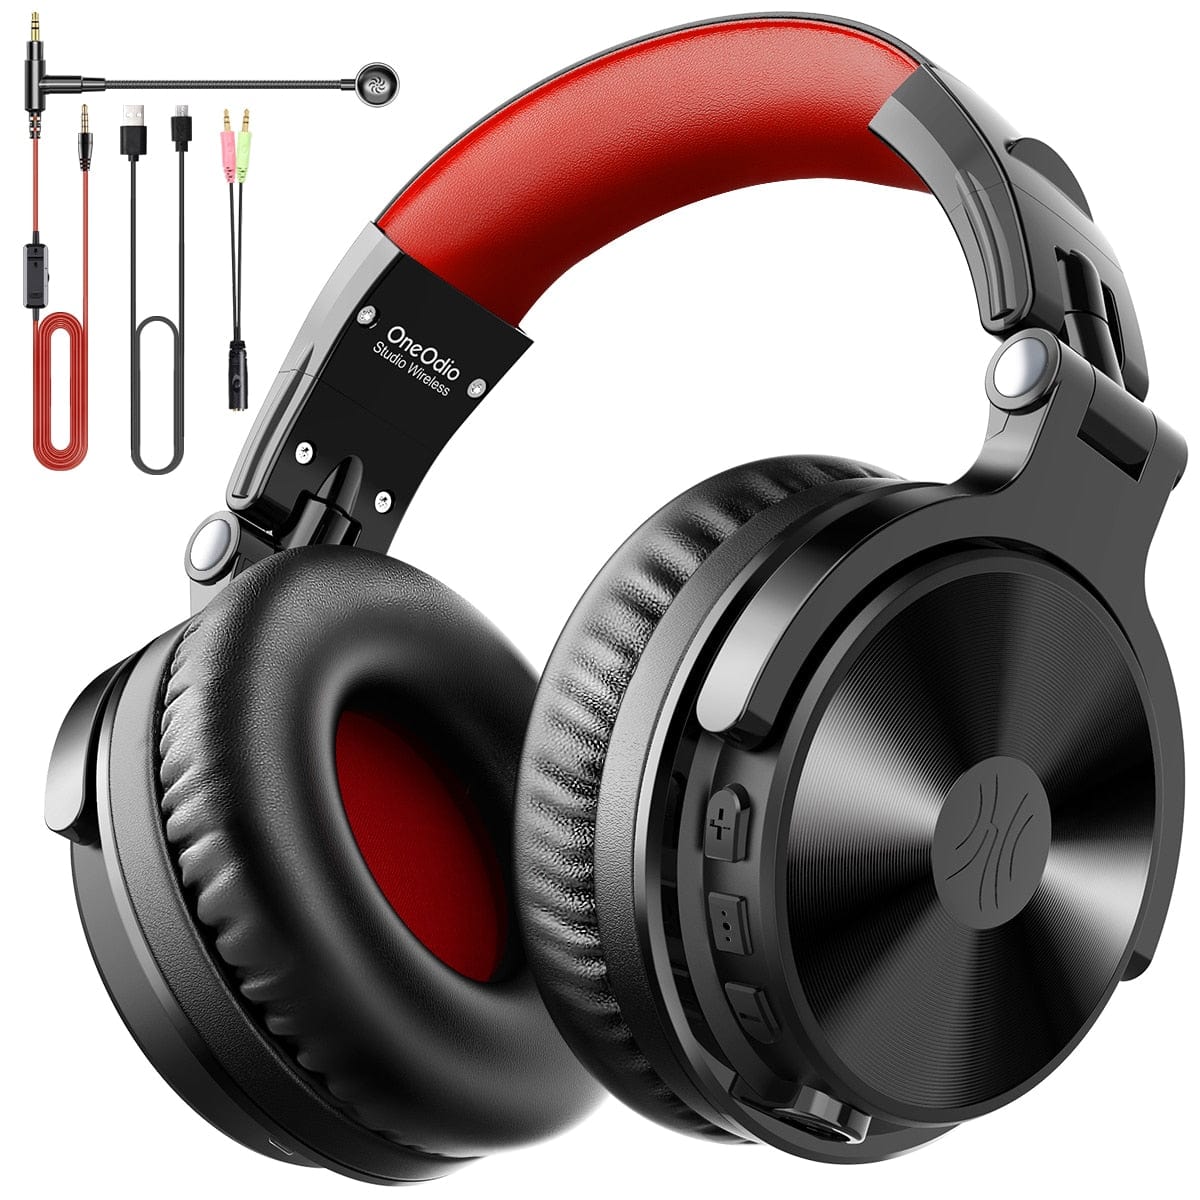 OneOdio OneOdio Wireless Headphone, Version Pro M, Supports Bluetooth 5.2, Playtime up to 110 Hourss, Color Black